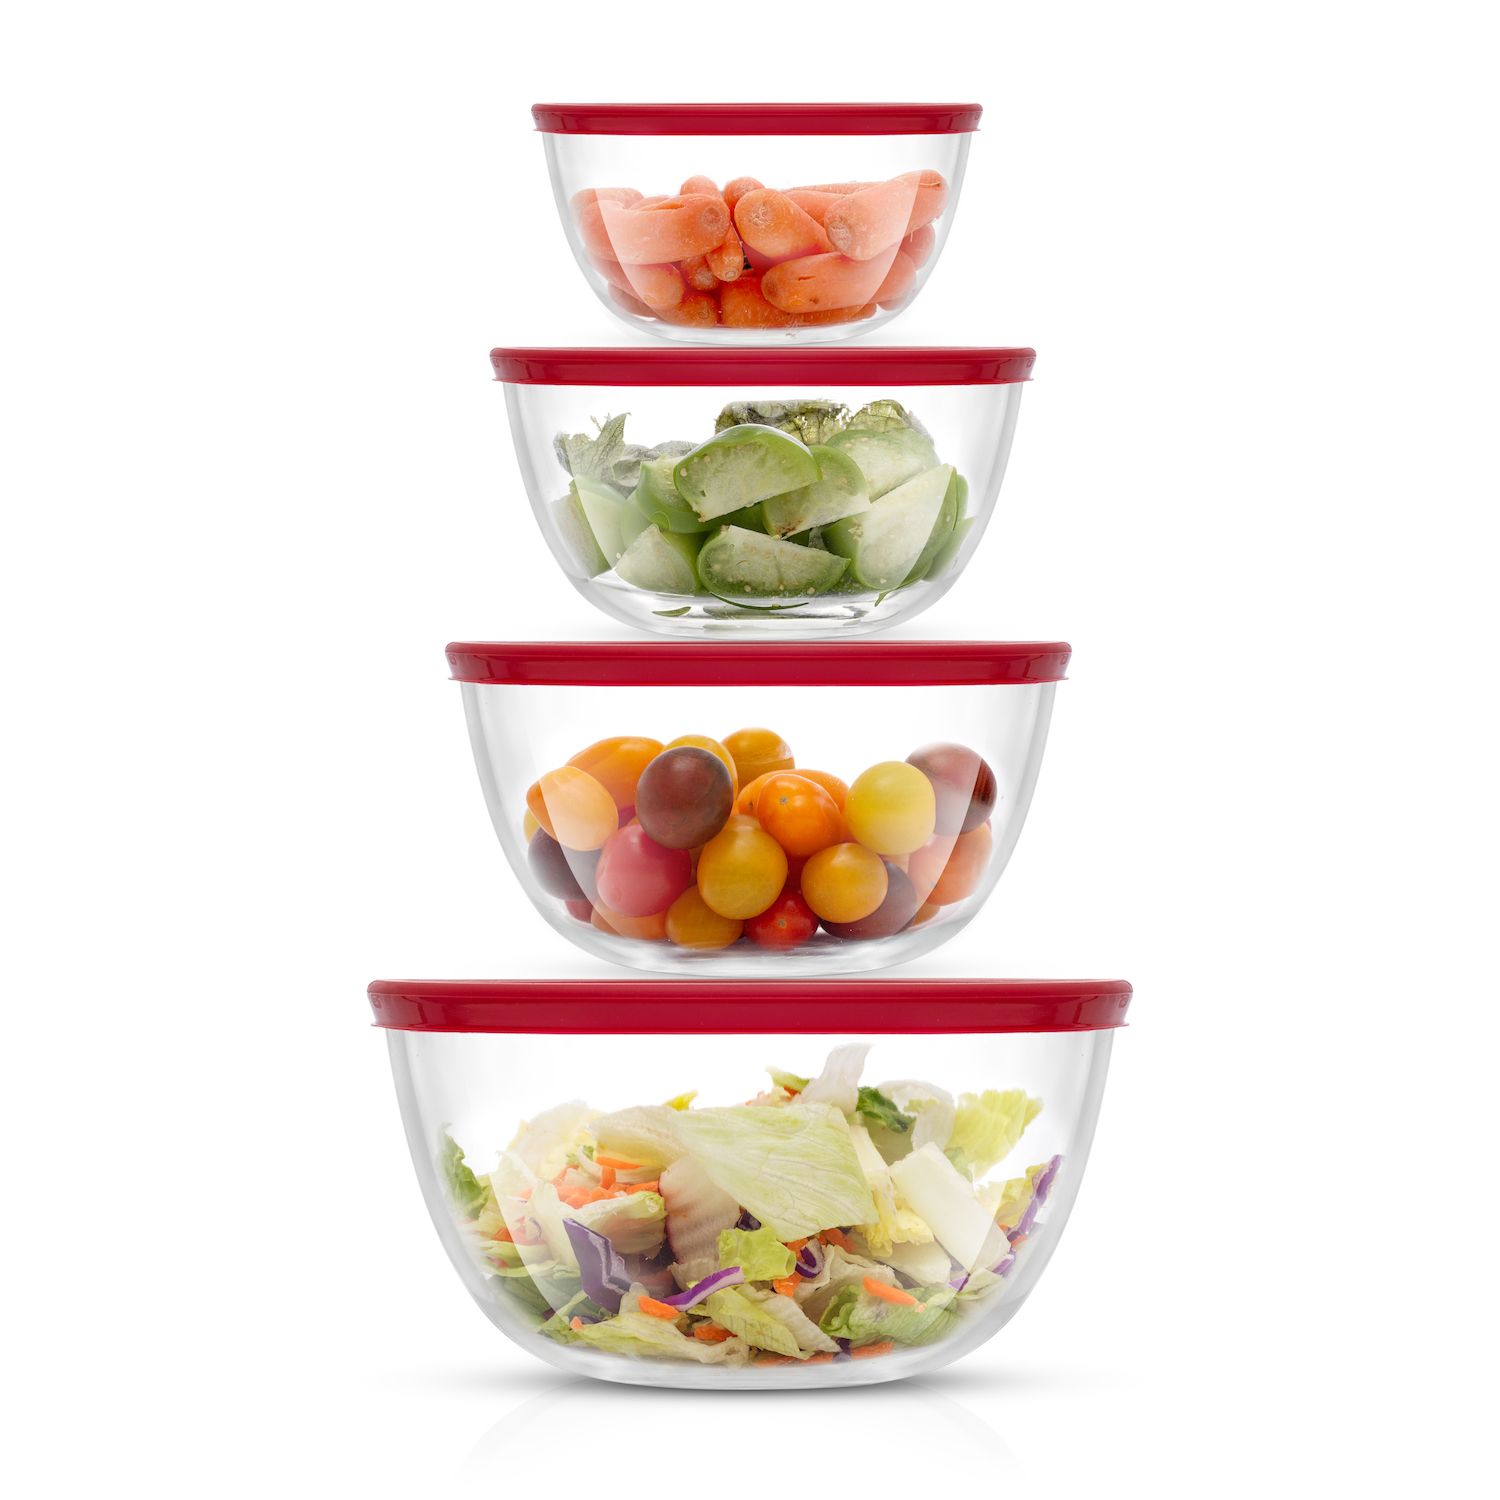 8 Piece Nesting Plastic Meal Prep Bowl Set with Lids - Small Bowls Food  Containers in Multiple Sizes - China Salad Bowl and Mixing Bowl price